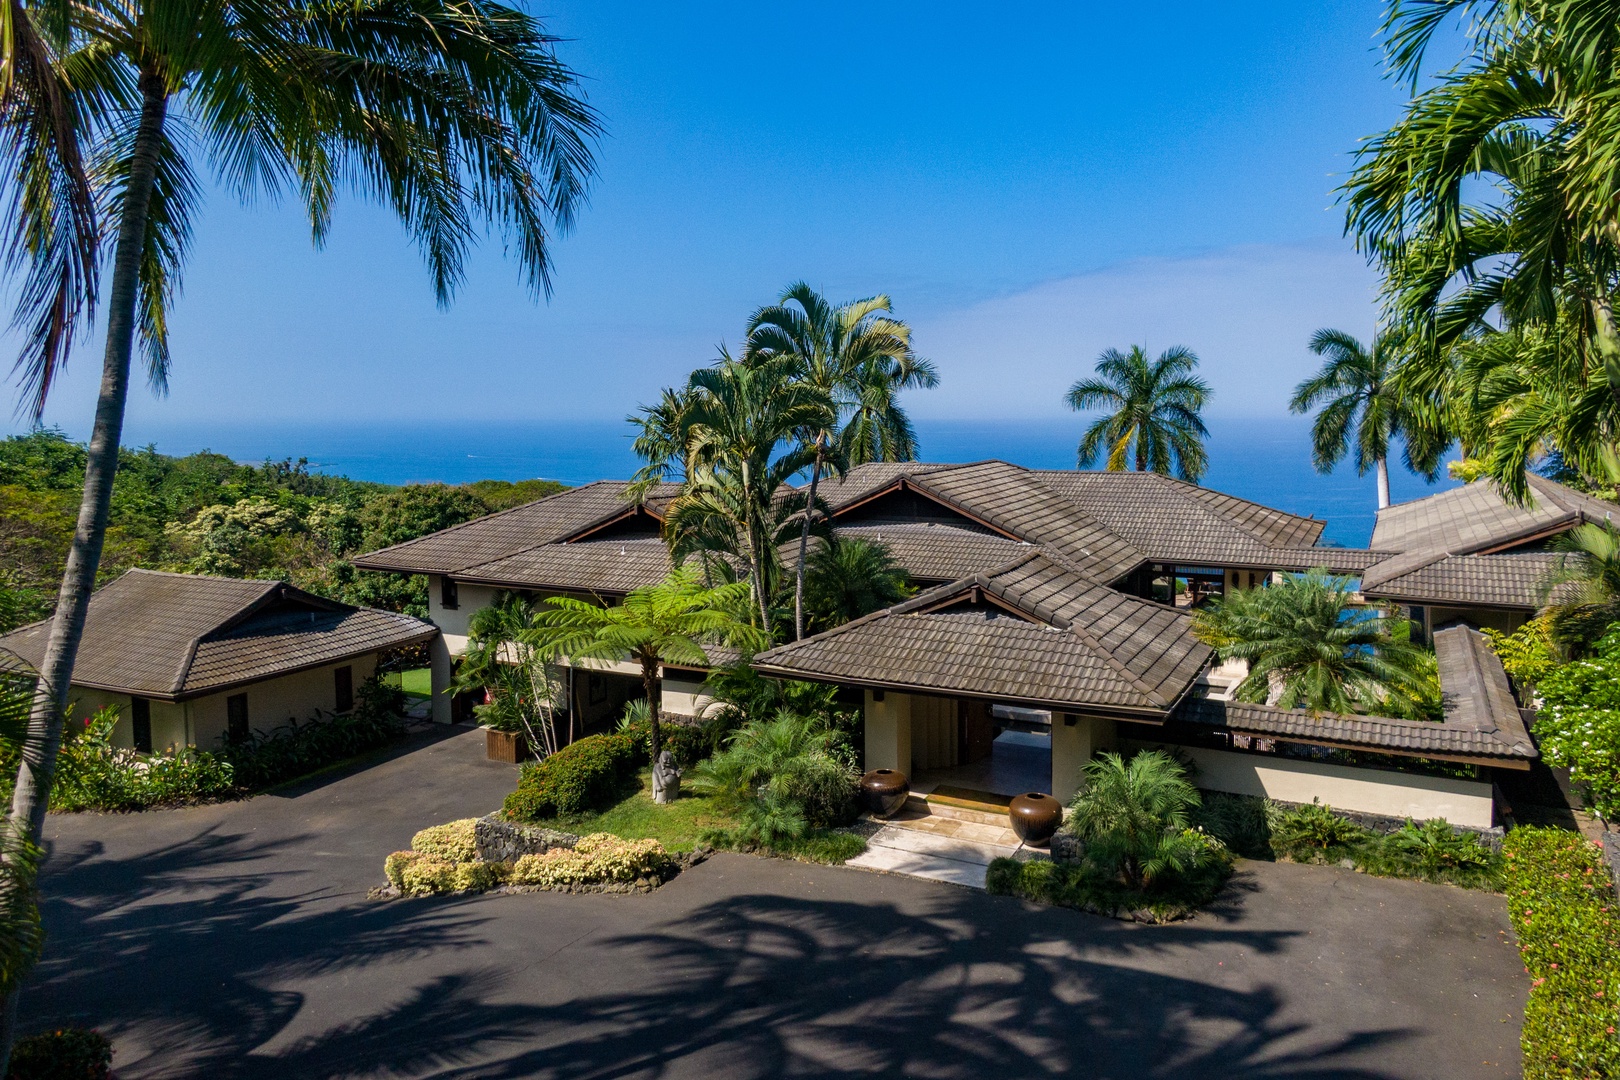 Kailua Kona Vacation Rentals, Hale Wailele** - At 1000 feet, the temperature is nearly always perfect